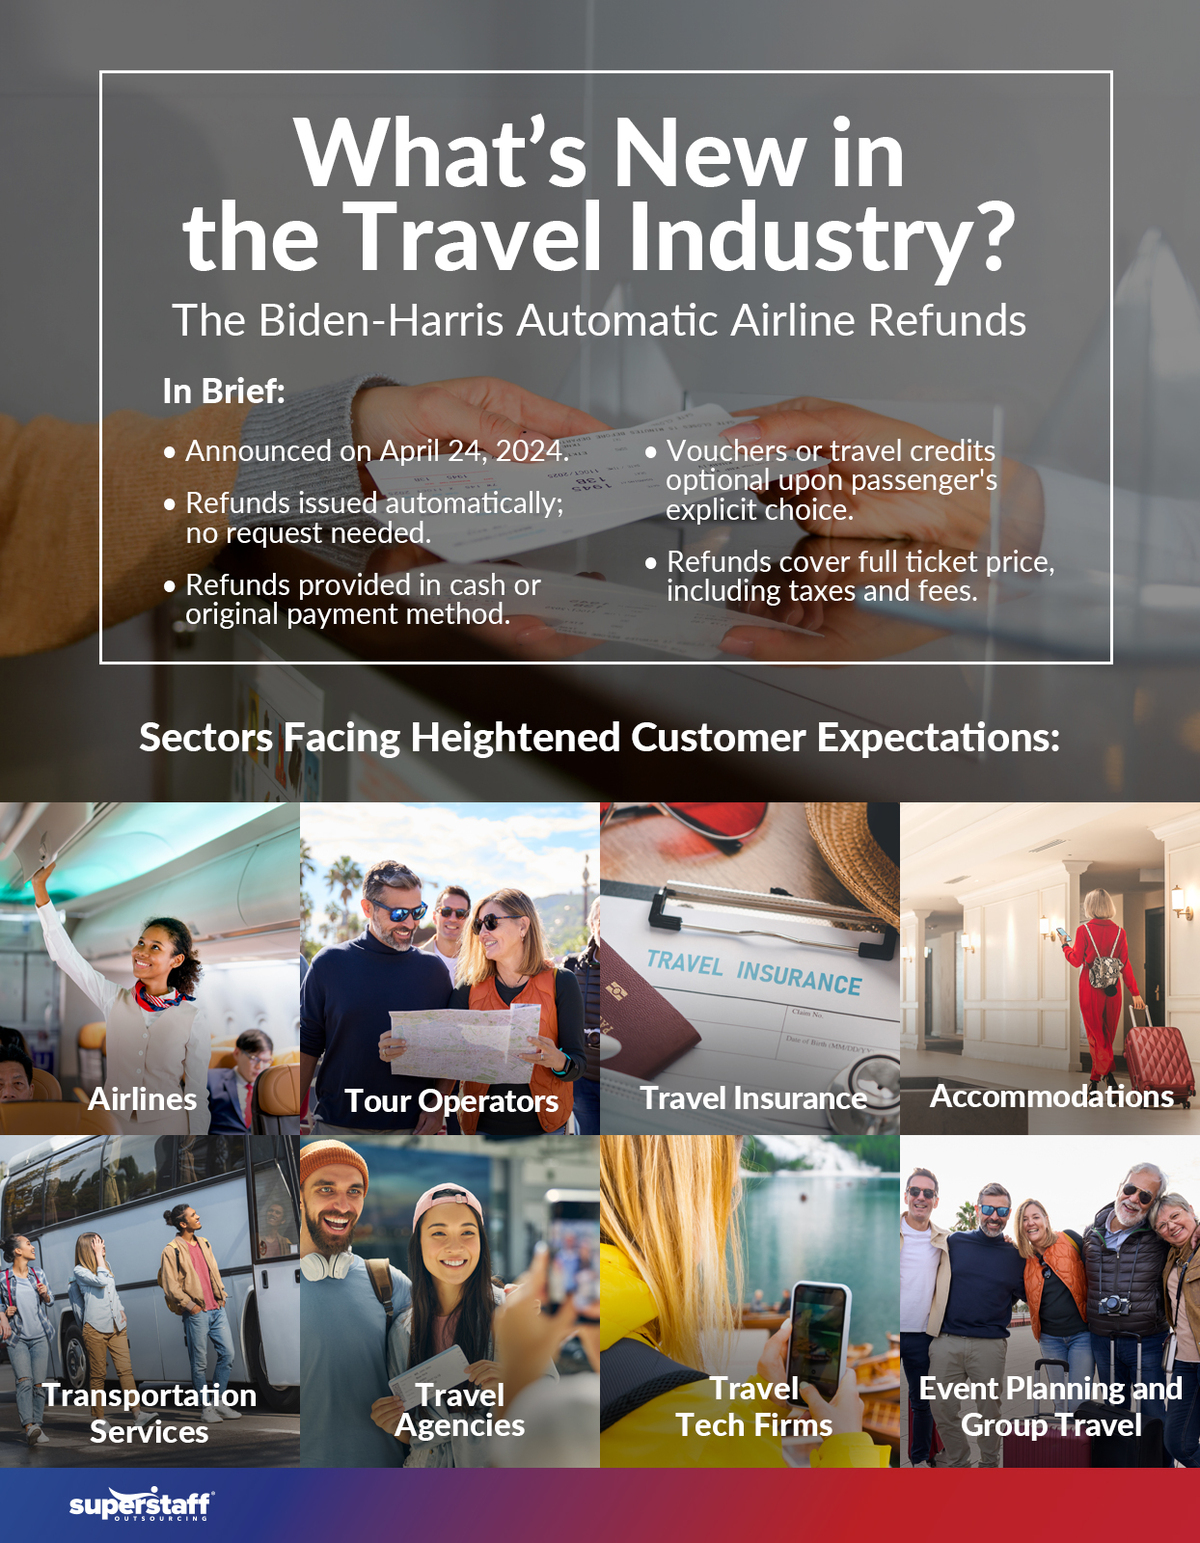 A mini infographic lists impact of the Bidden-harris automatic airline refunds on customer experience.